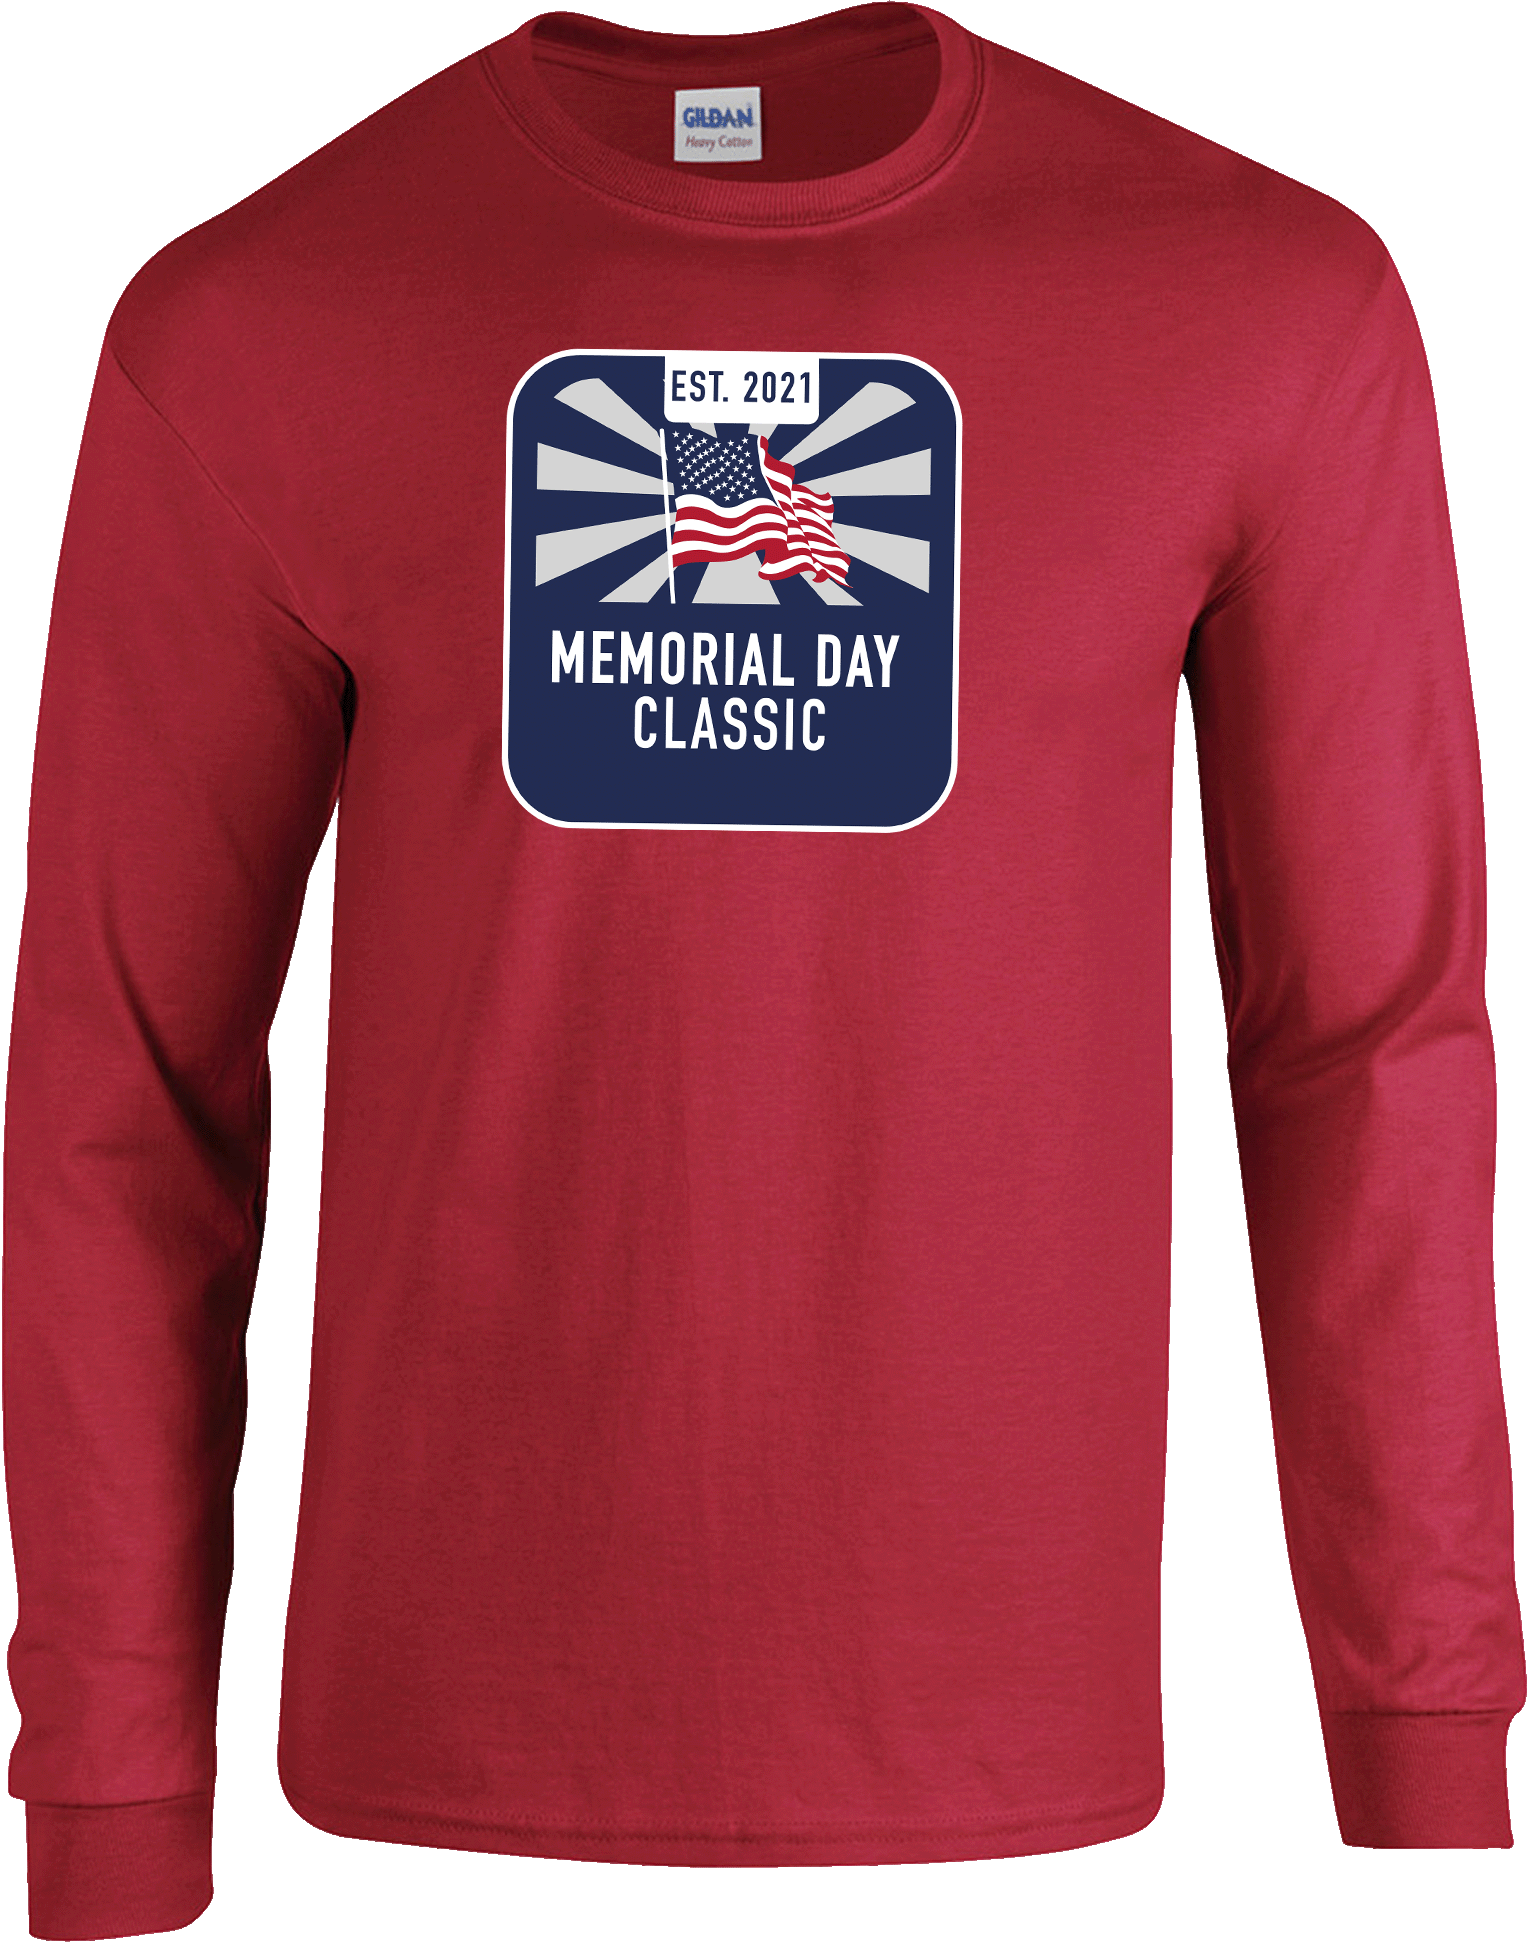 LONG SLEEVES - 2023 Memorial Day Classic